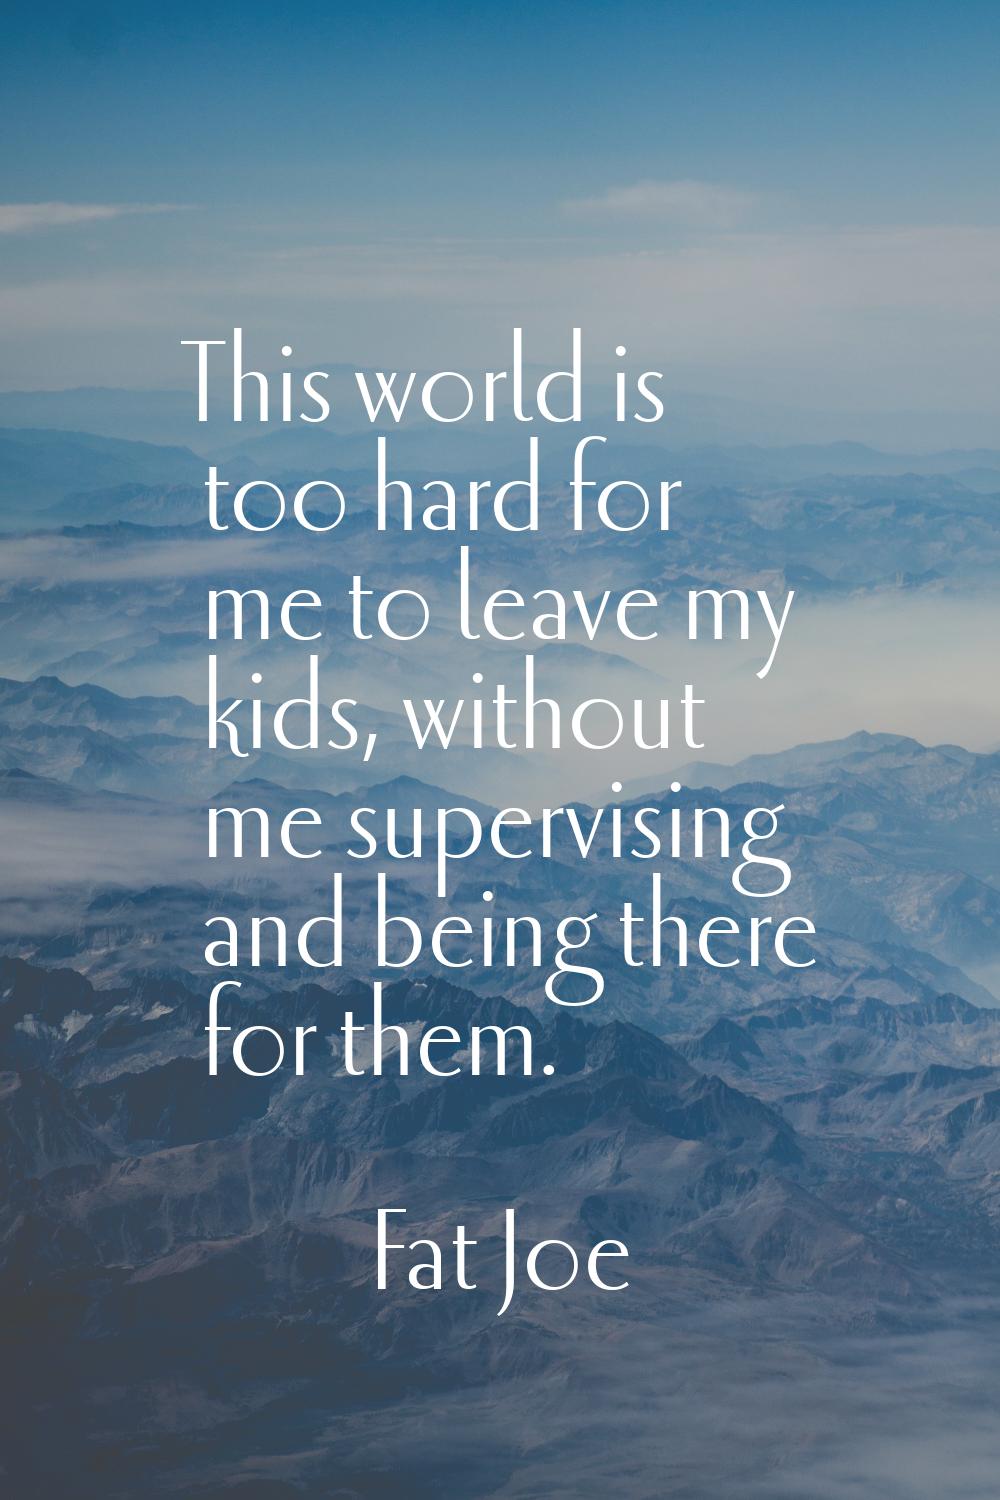 This world is too hard for me to leave my kids, without me supervising and being there for them.